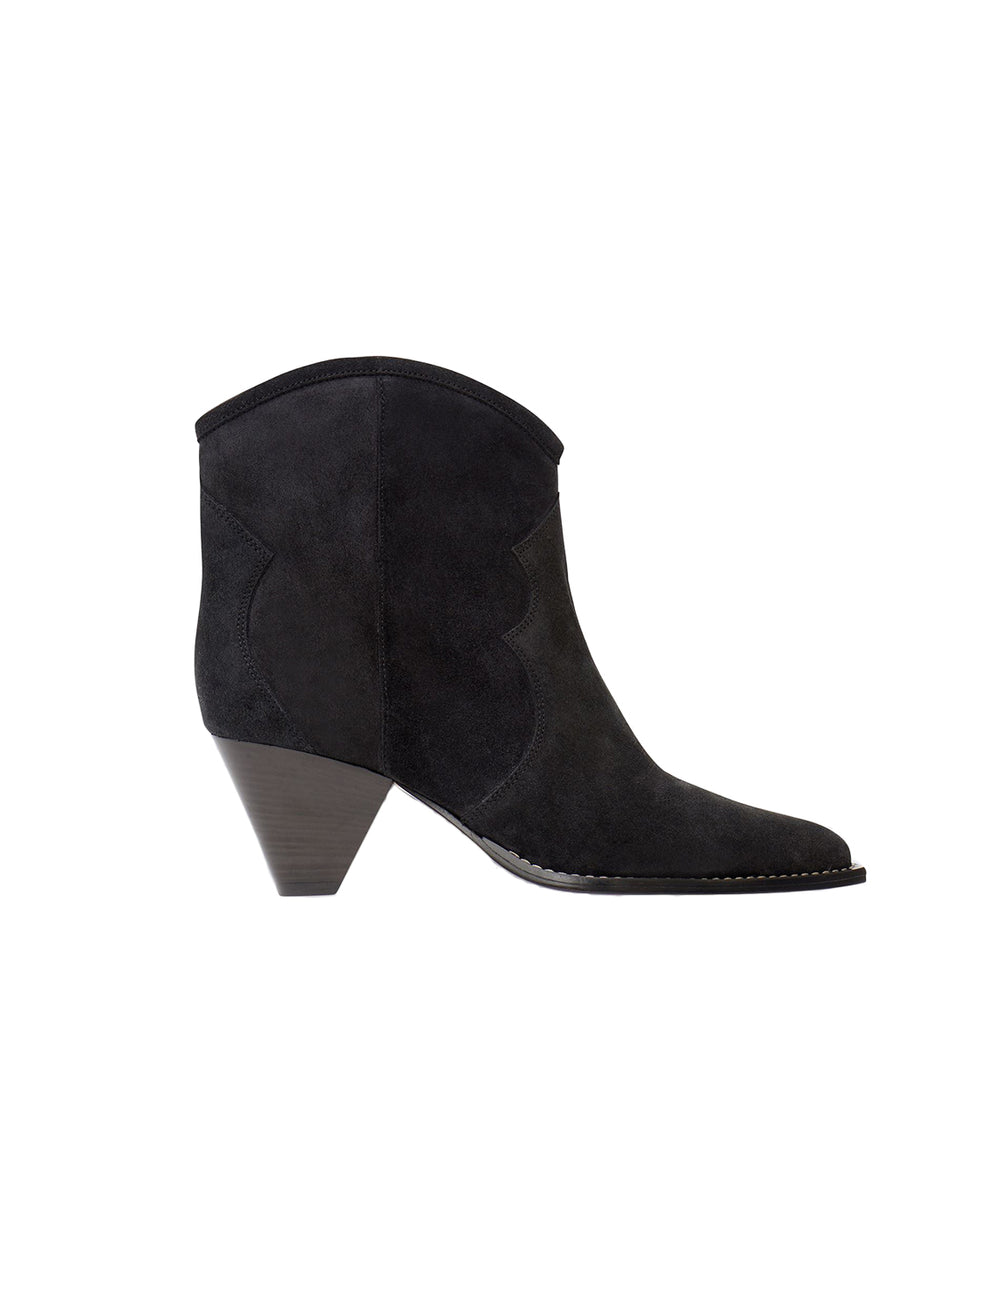 Side view of Isabel Marant Etoile's Darizo Boot in Faded Black Suede.